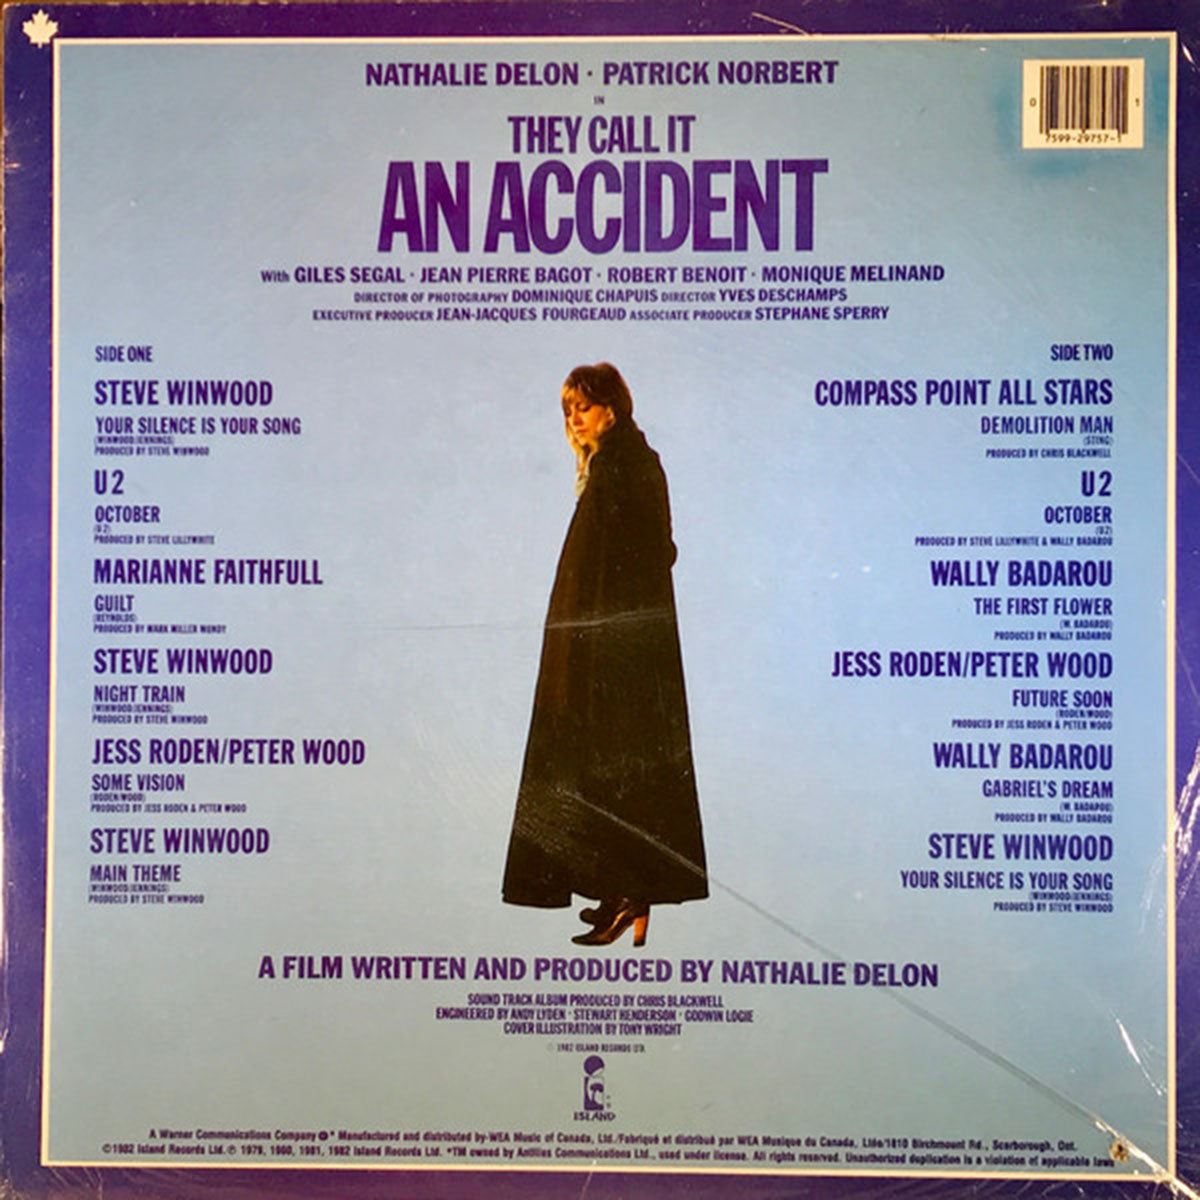 They Call It An Accident – Original Soundtrack